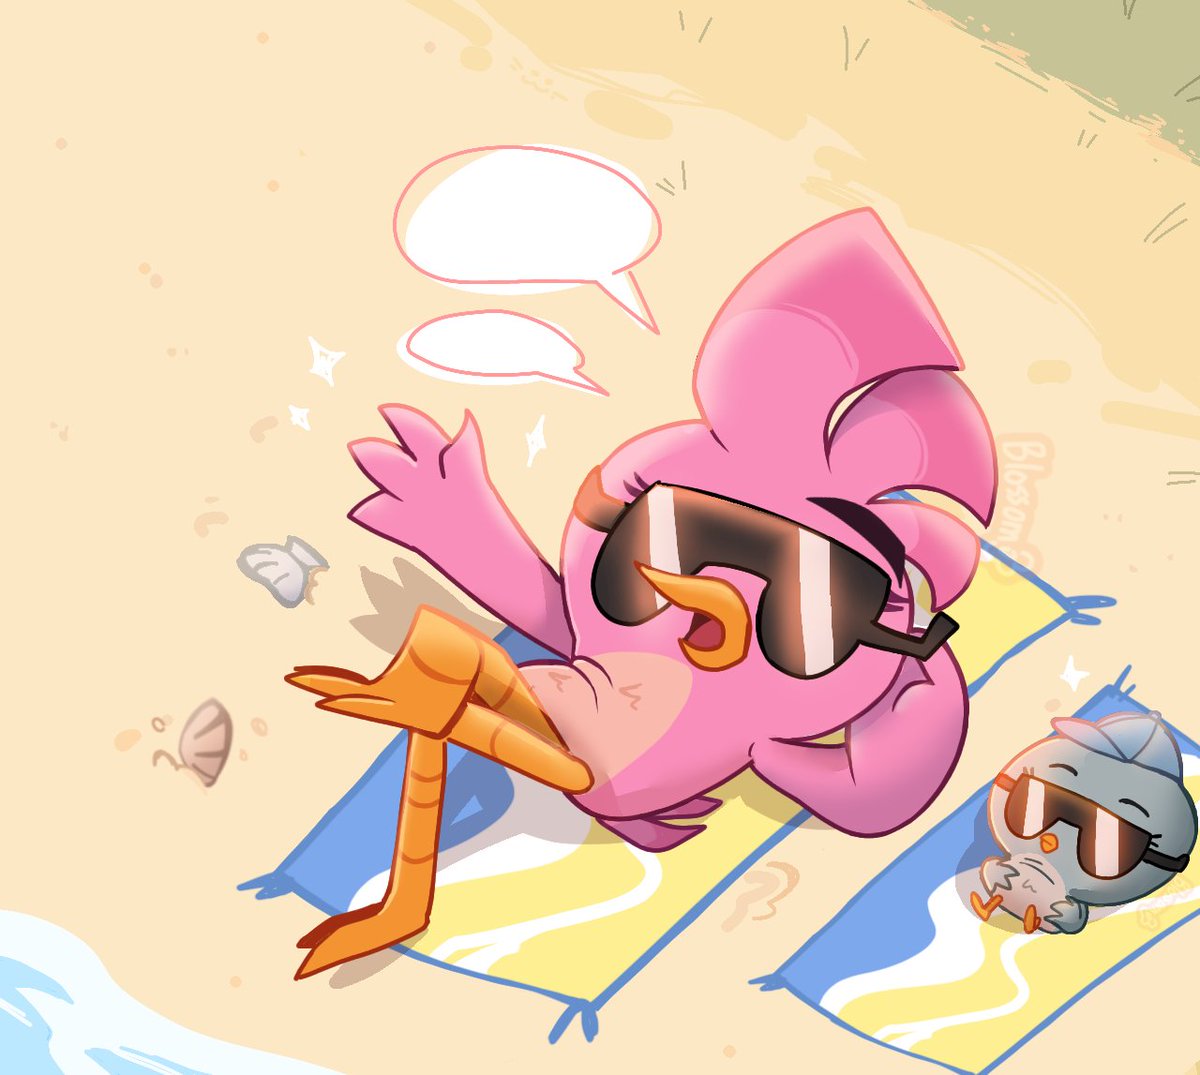 Stella and Darcy just chilling by the beach! 
#Angrybirds #fanart #angrybirdssummermadness